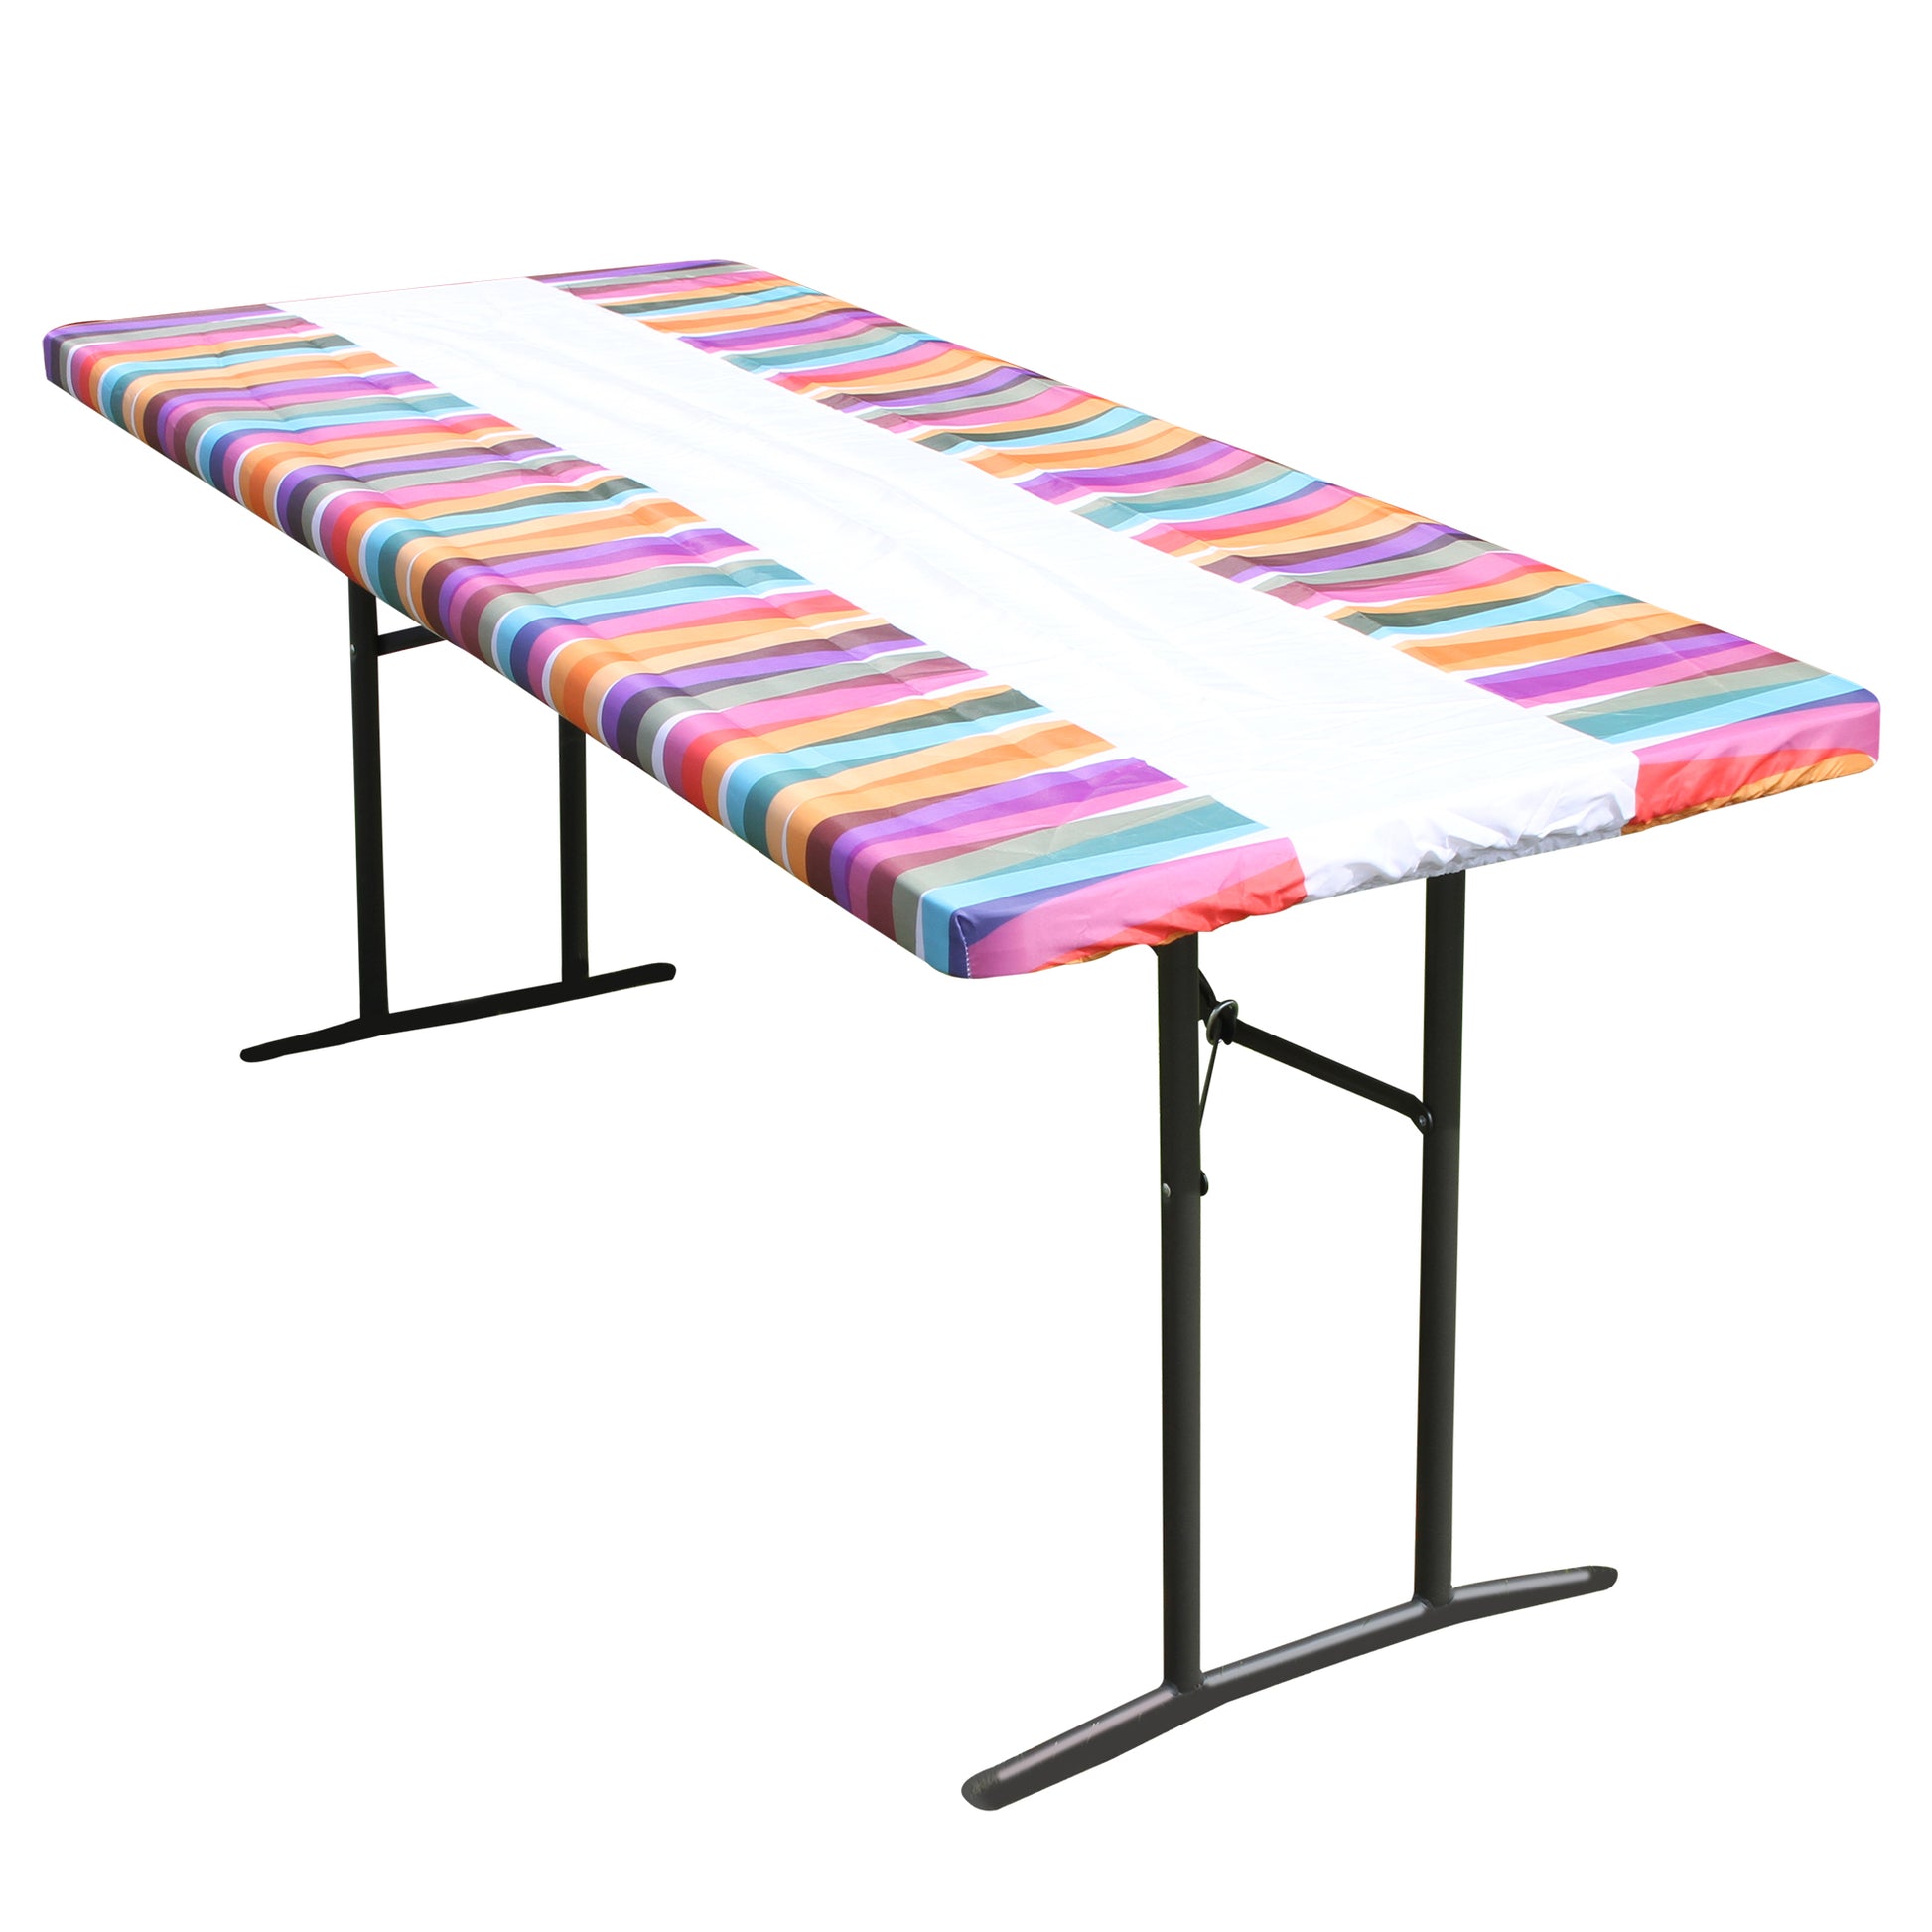 TableCloth PLUS 72" Laces Fitted Polyester Tablecloth for 6' Folding Tables is easy to clean, water proof, easy to install, and has an elastic rim